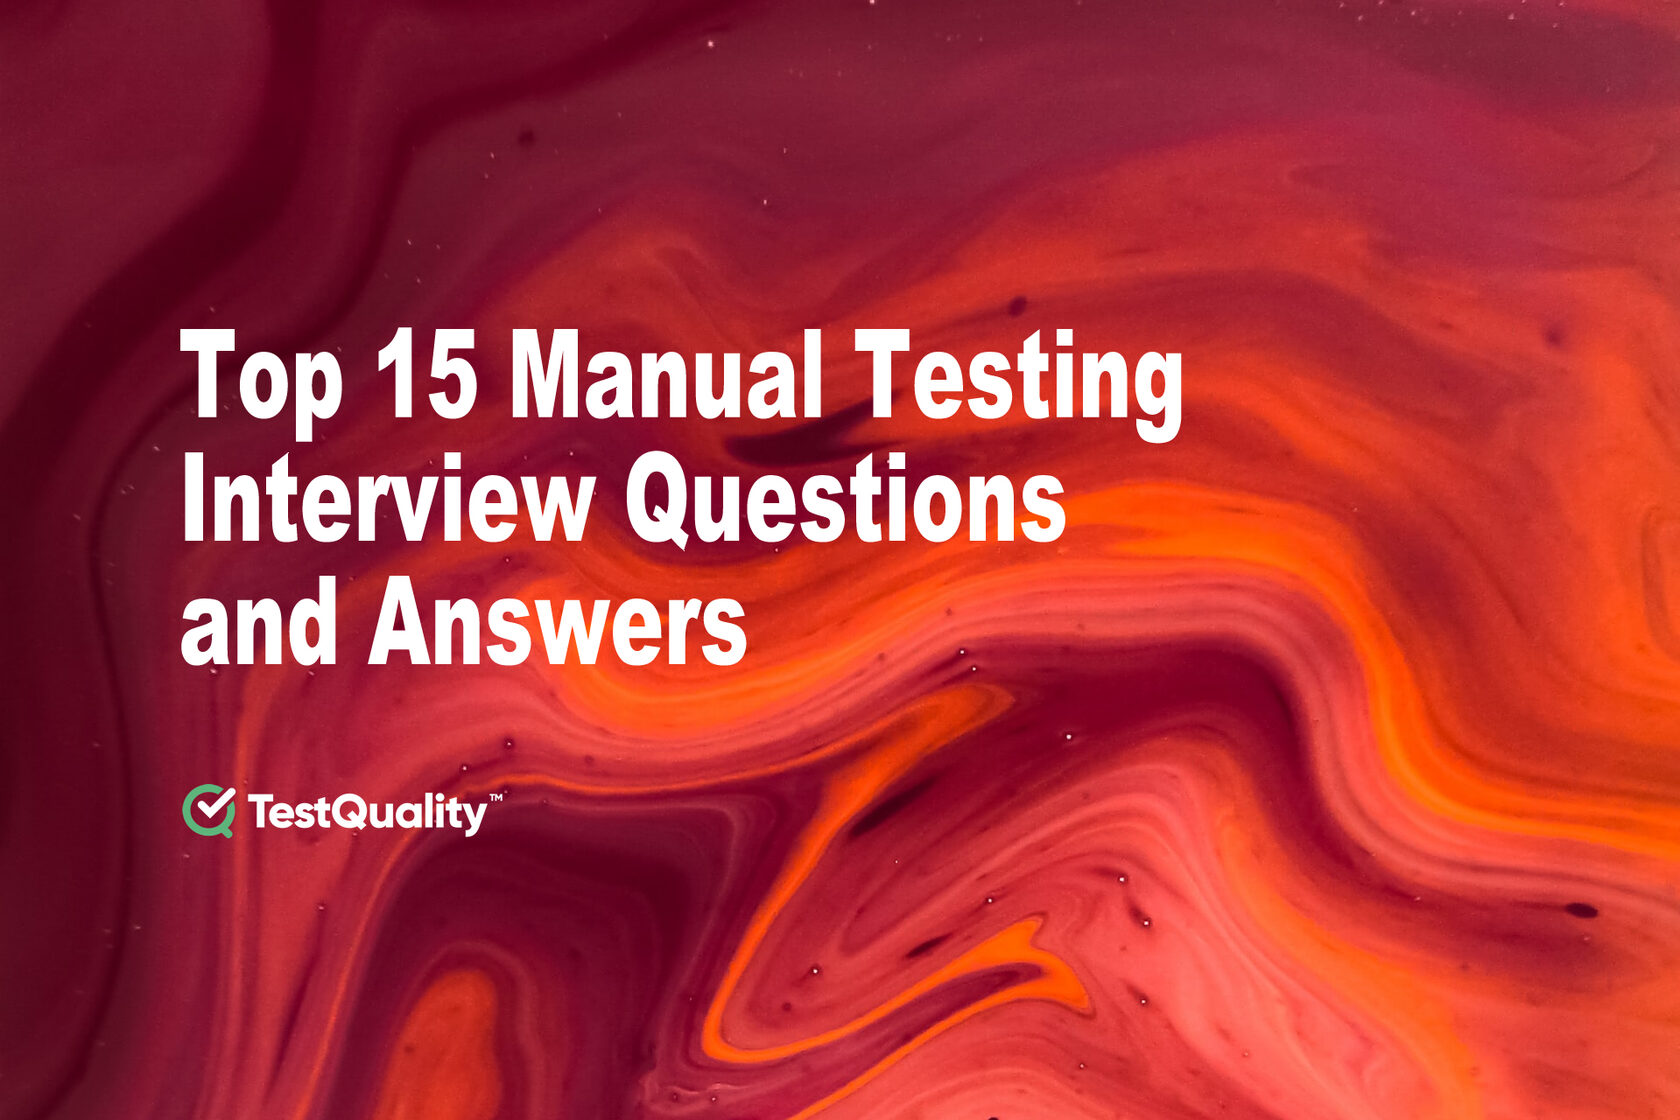 Top Manual Testing Interview Questions and Answers | TestQuality